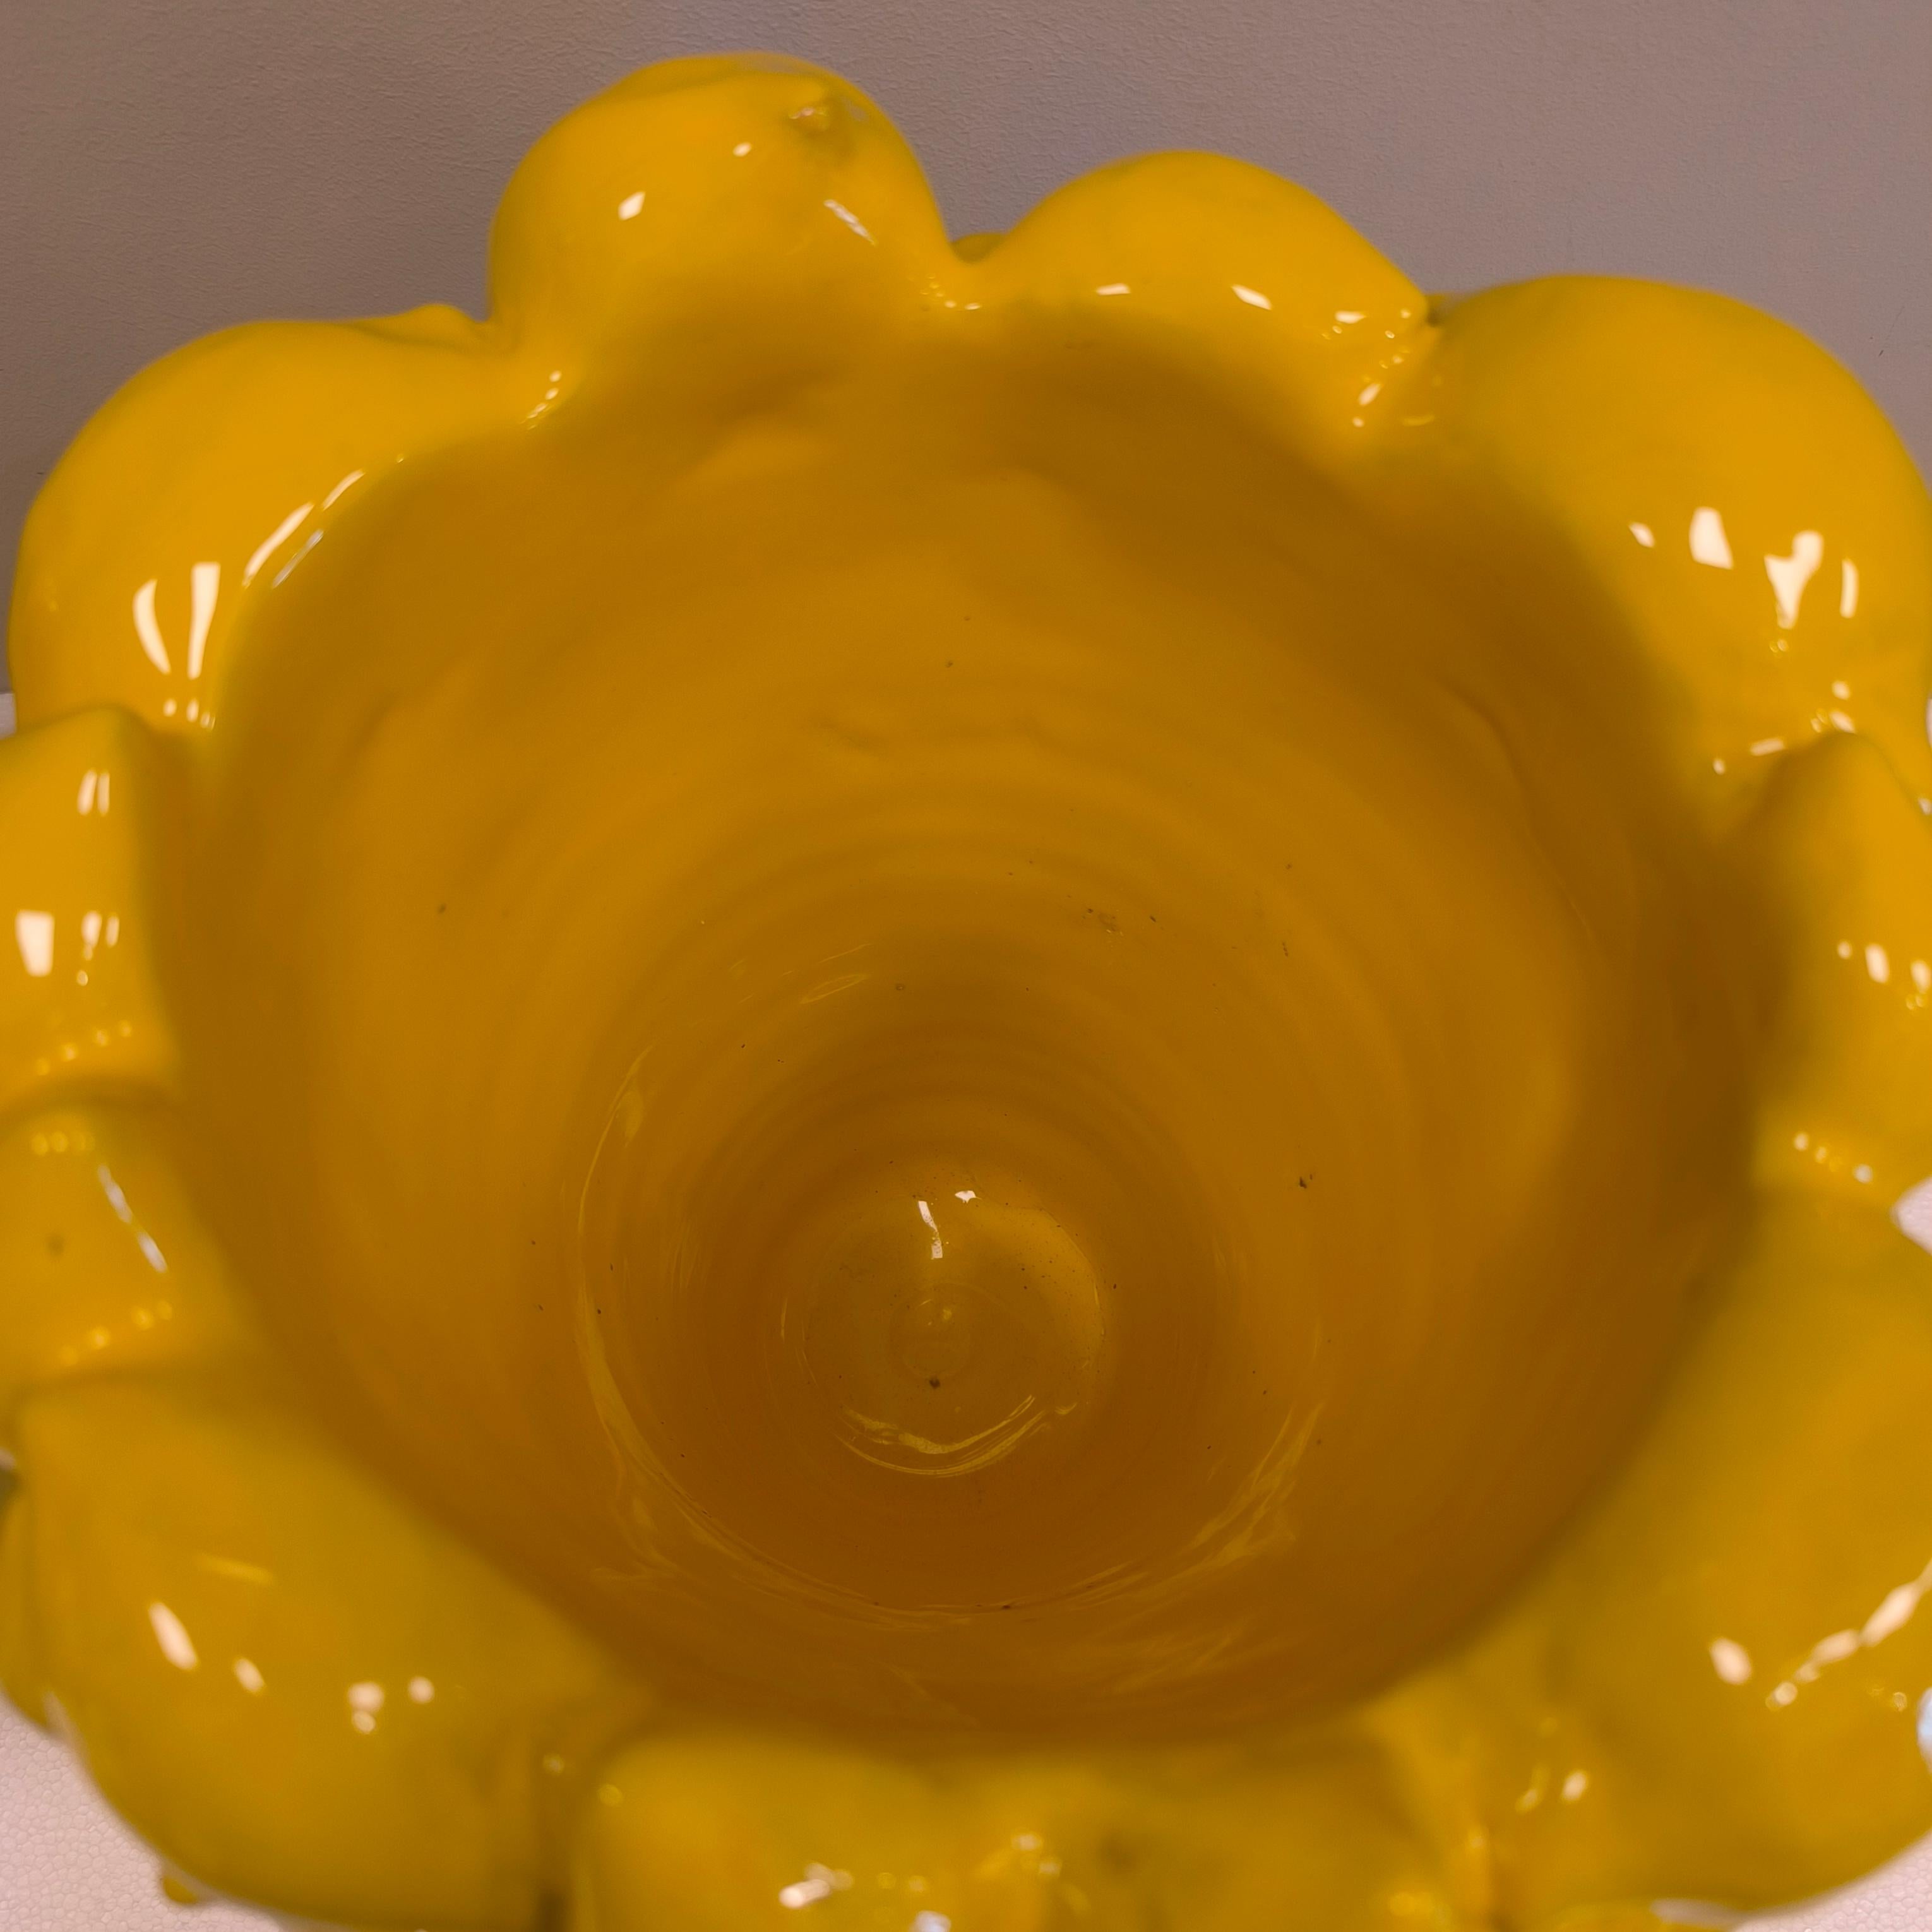 Pair of Italy  lemon vases, Yellow glazed ceramic, R. Acampora, Limited Edition For Sale 3